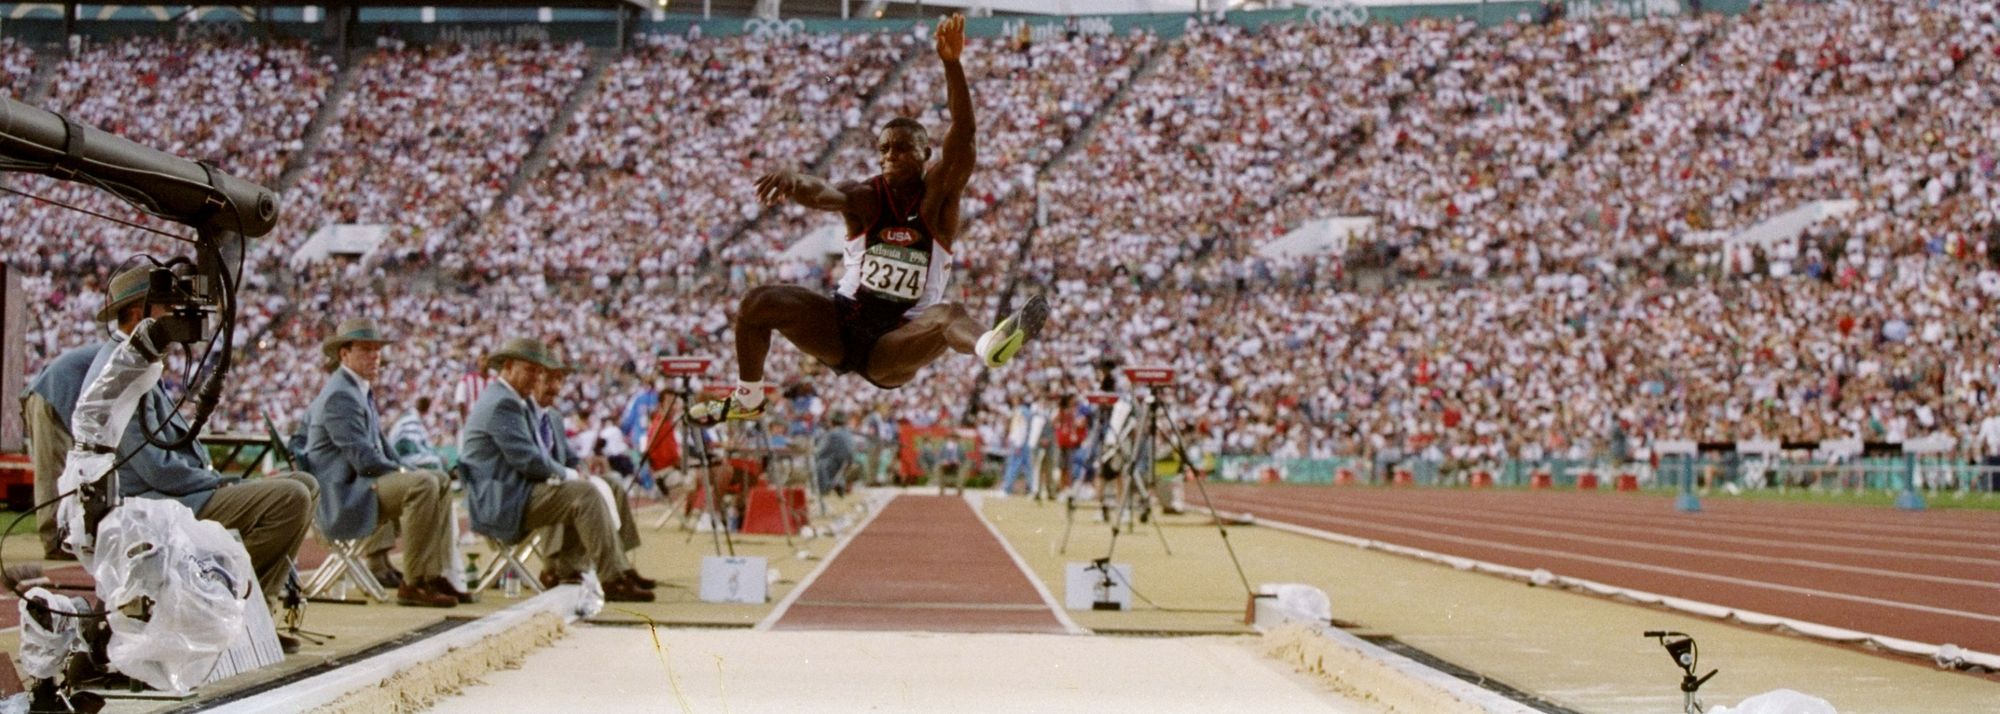 Known as one of track and field’s two horizontal jumps, competitors sprint along a runway and jump as far as possible into a sandpit from a wooden take-off board.